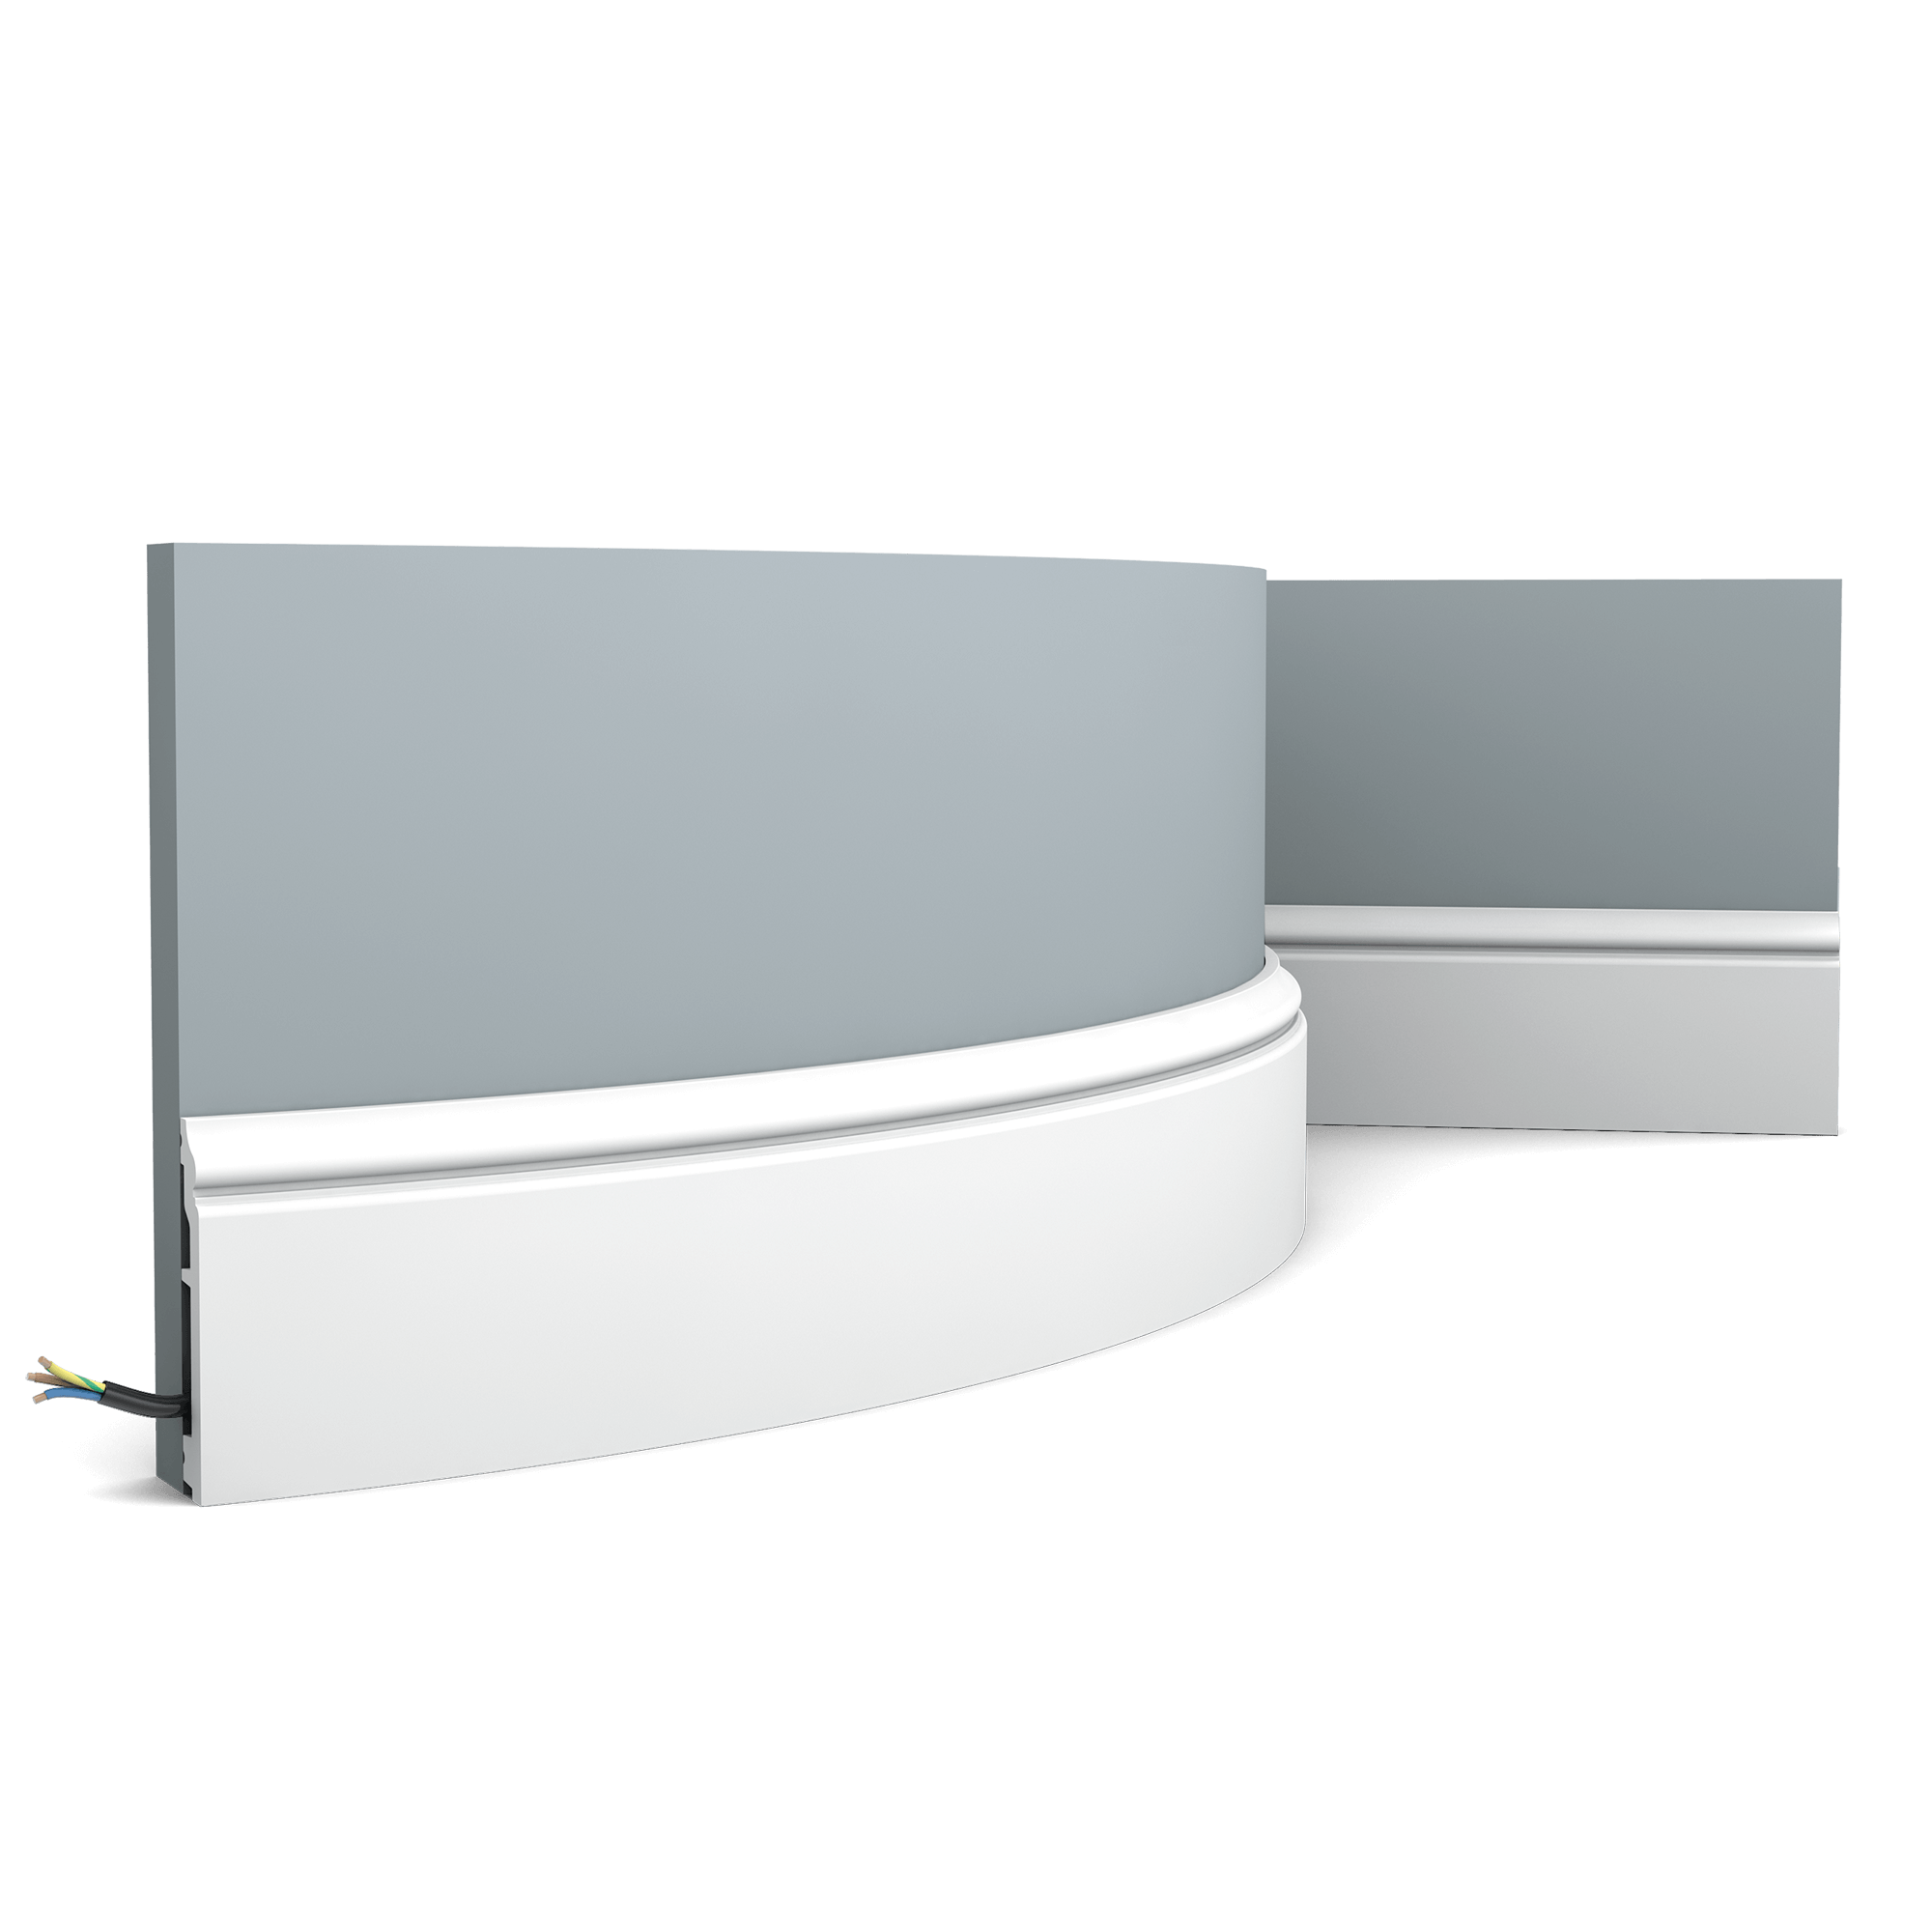 Flexible version of the SX173. Elegant, classic skirting board from the CONTOUR family which combines a minimalist design with gentle curlicues. Thanks to its Flex technology, curved walls and surfaces are no problem. Installation remark: It is necessary to screw this profile on the wall. Flex Radius: R min = 45 cm